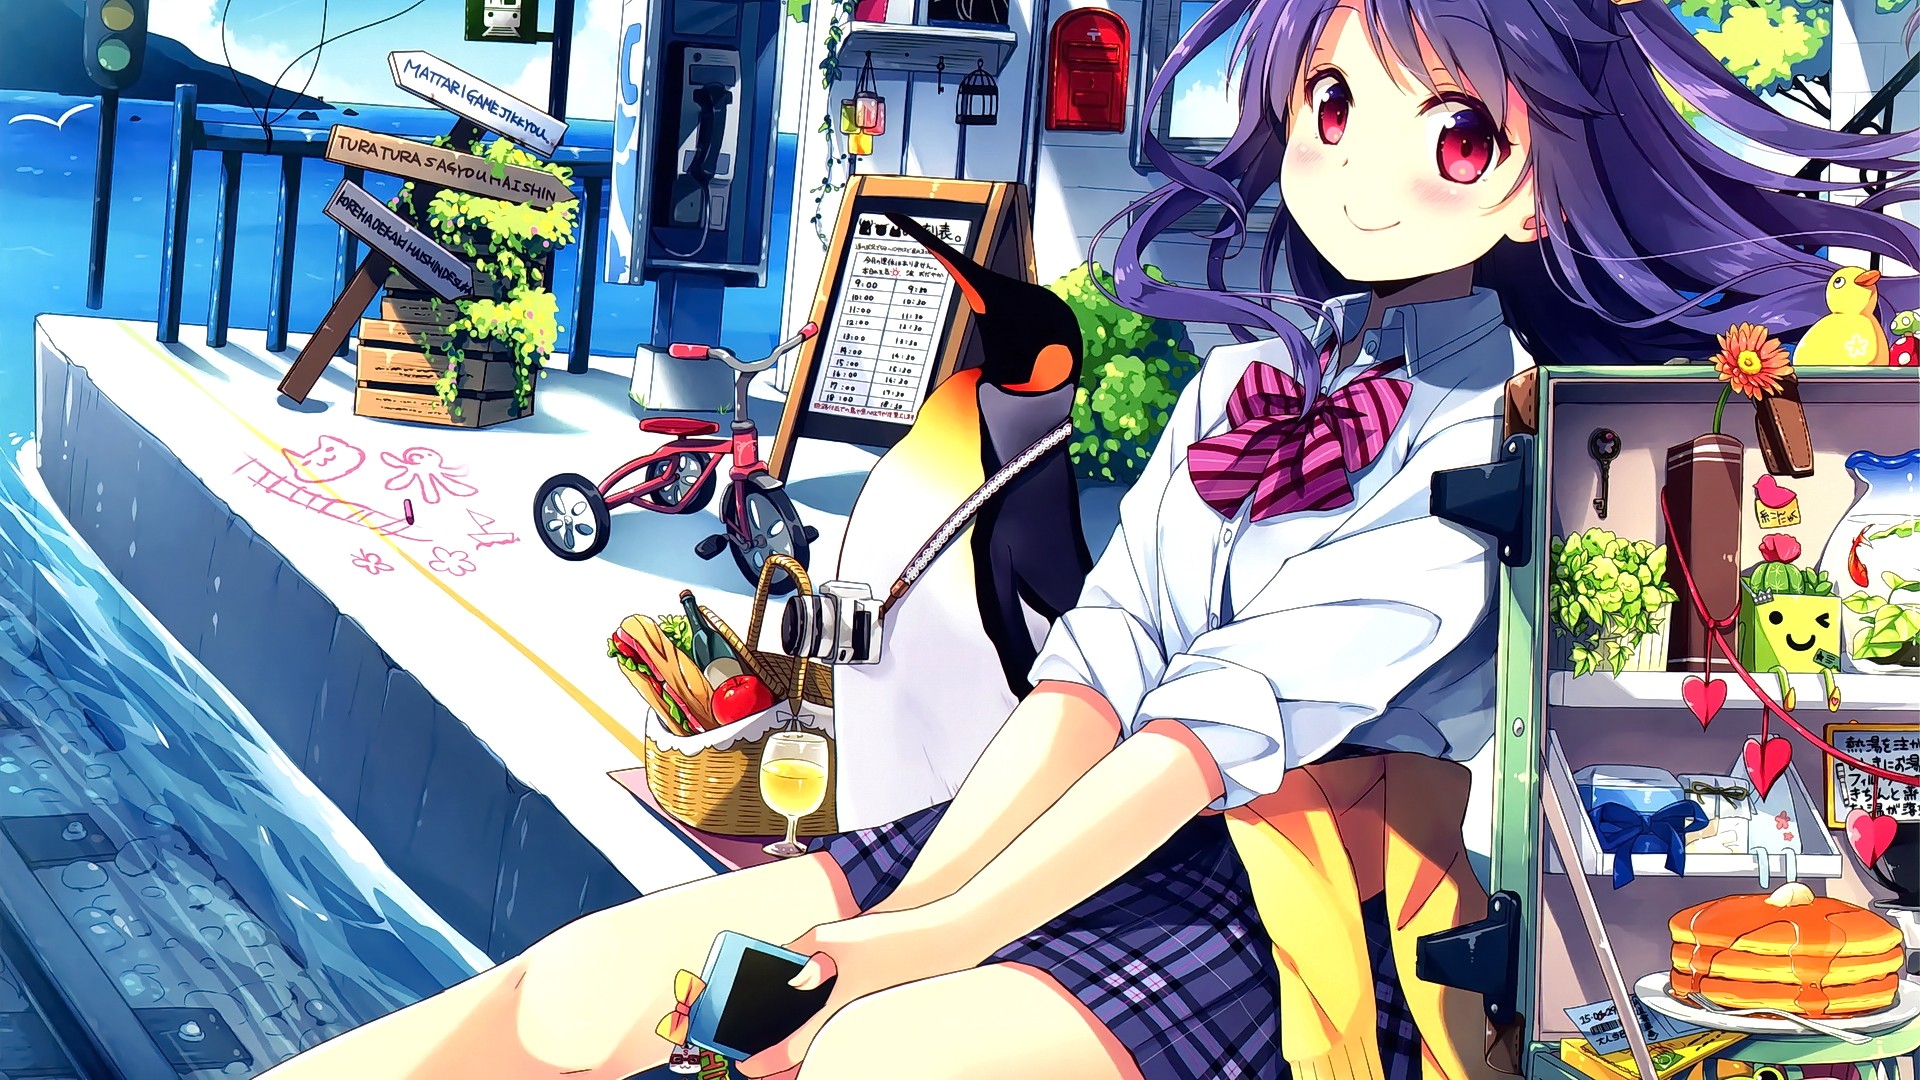 Anime 1920x1080 anime girls anime purple hair food red eyes Natsume Eri schedule smiling schoolgirl school uniform sitting water sign drawing pancakes bow tie penguins purple eyes blushing tricycle sandwiches baskets drink wind hair blowing in the wind camera phone